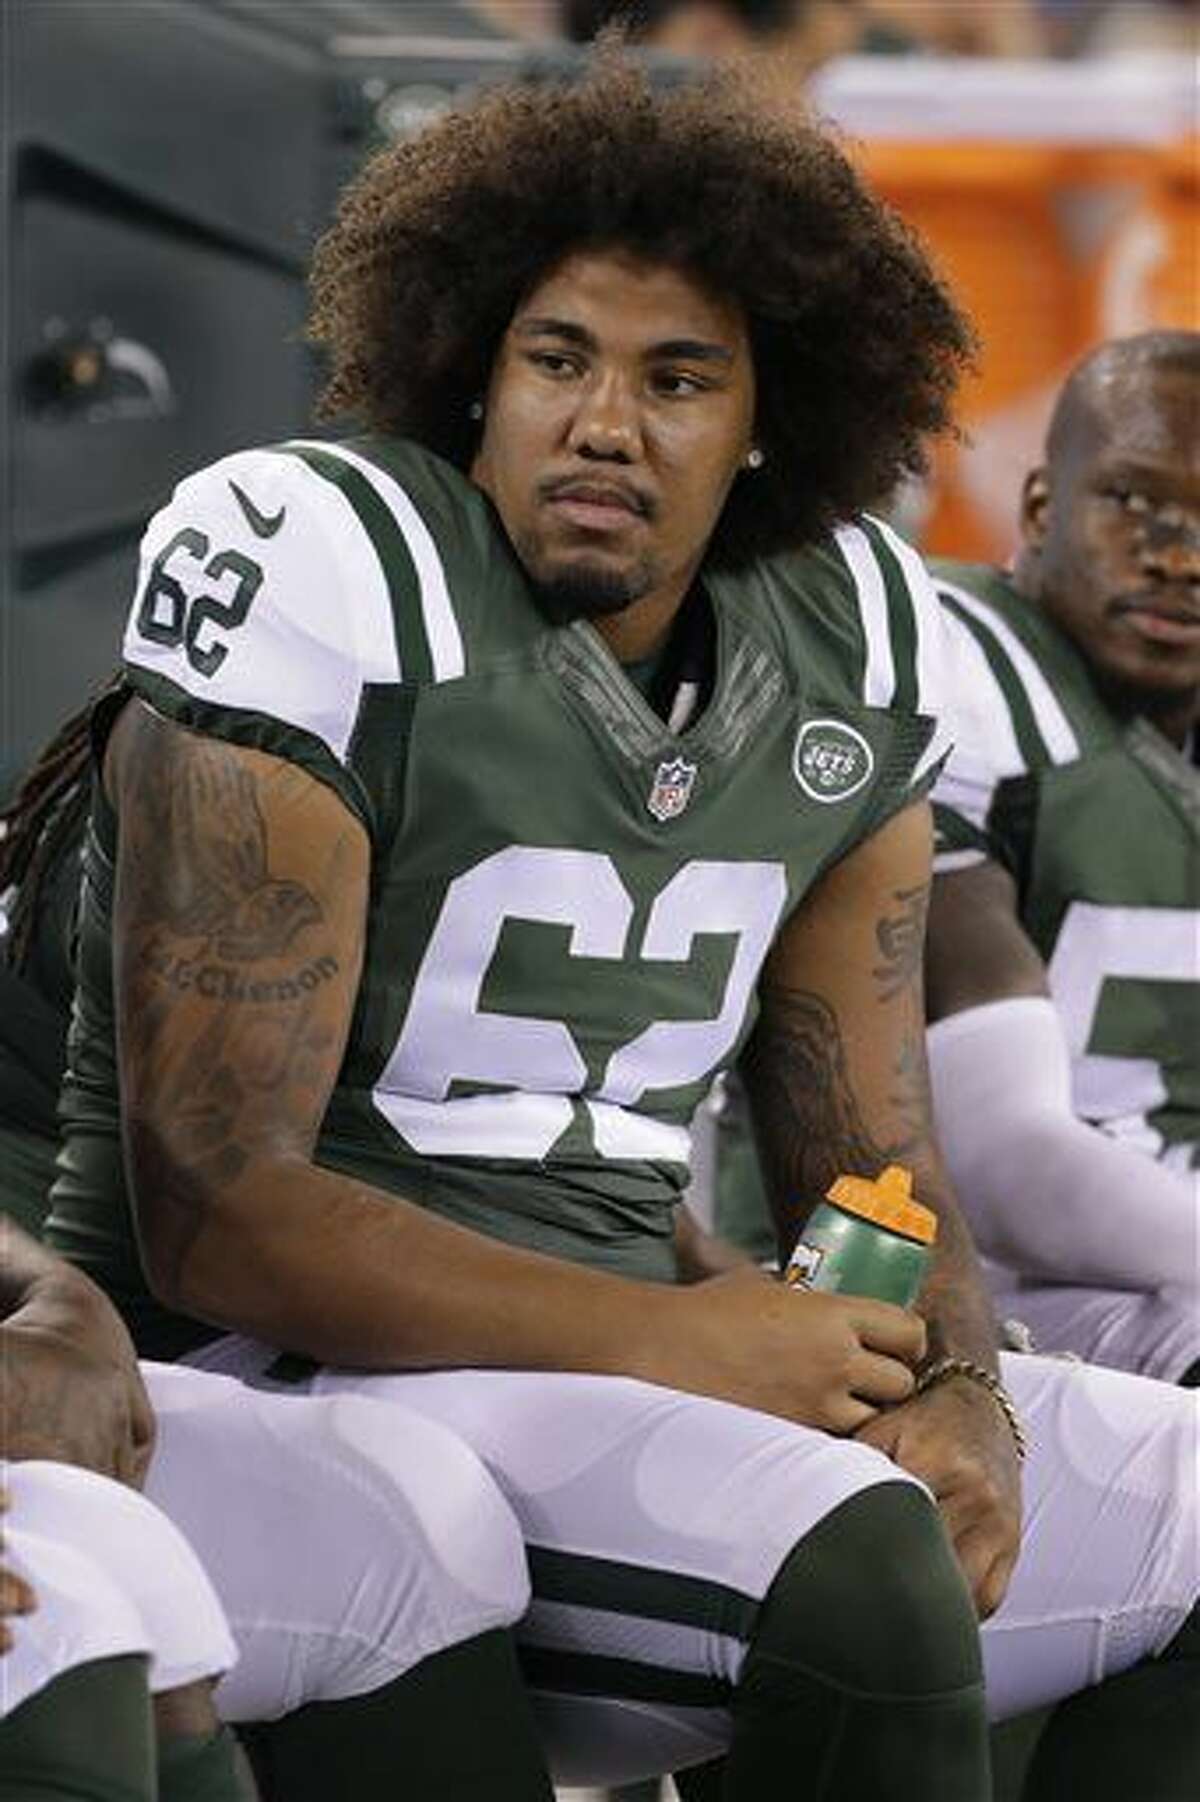 FILE - In this Sept. 3, 2015, file photo, New York Jets defensive tackle Leonard Williams (62) talks to teammates during the second half of a preseason NFL football game against the Philadelphia Eagles in East Rutherford, N.J. Williams realized toward the end of a solid rookie year that he, too, could benefit from cold tub therapy. (AP Photo/Peter Morgan, File)